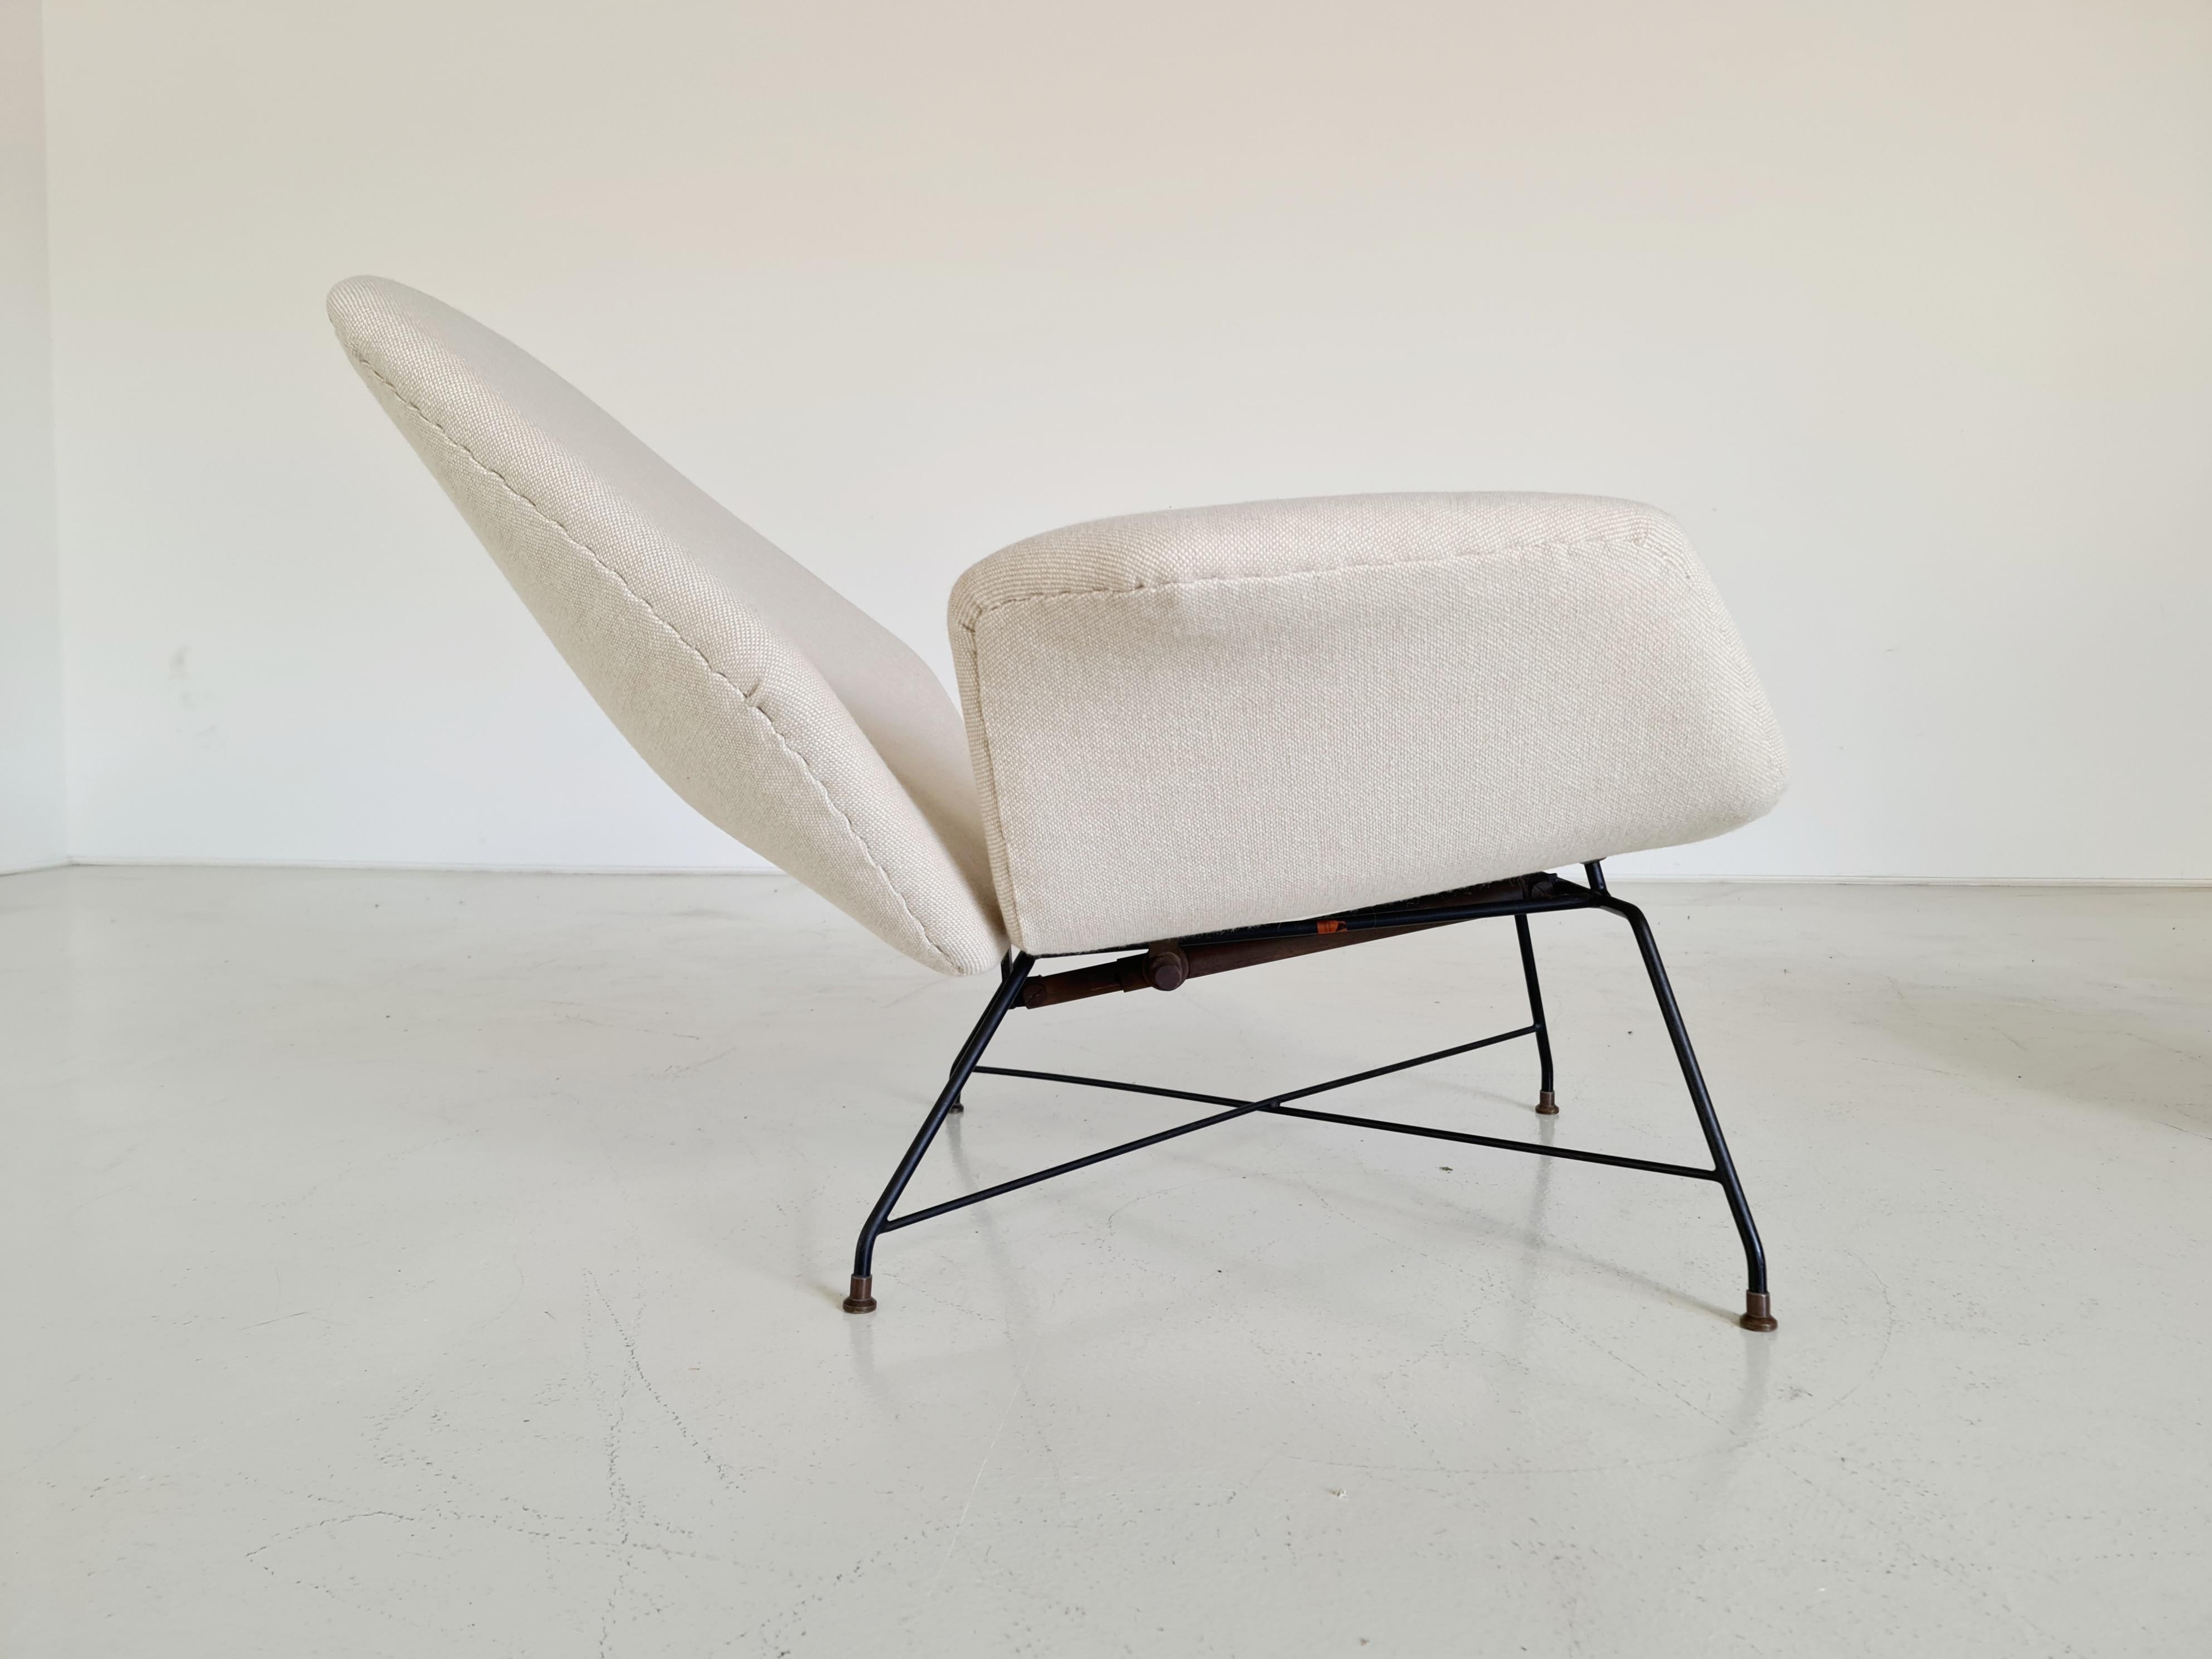 ‘Lotus’ Lounge Chairs in cream wool fabric by Augusto Bozzi for Saporiti, 1960s In Good Condition For Sale In amstelveen, NL